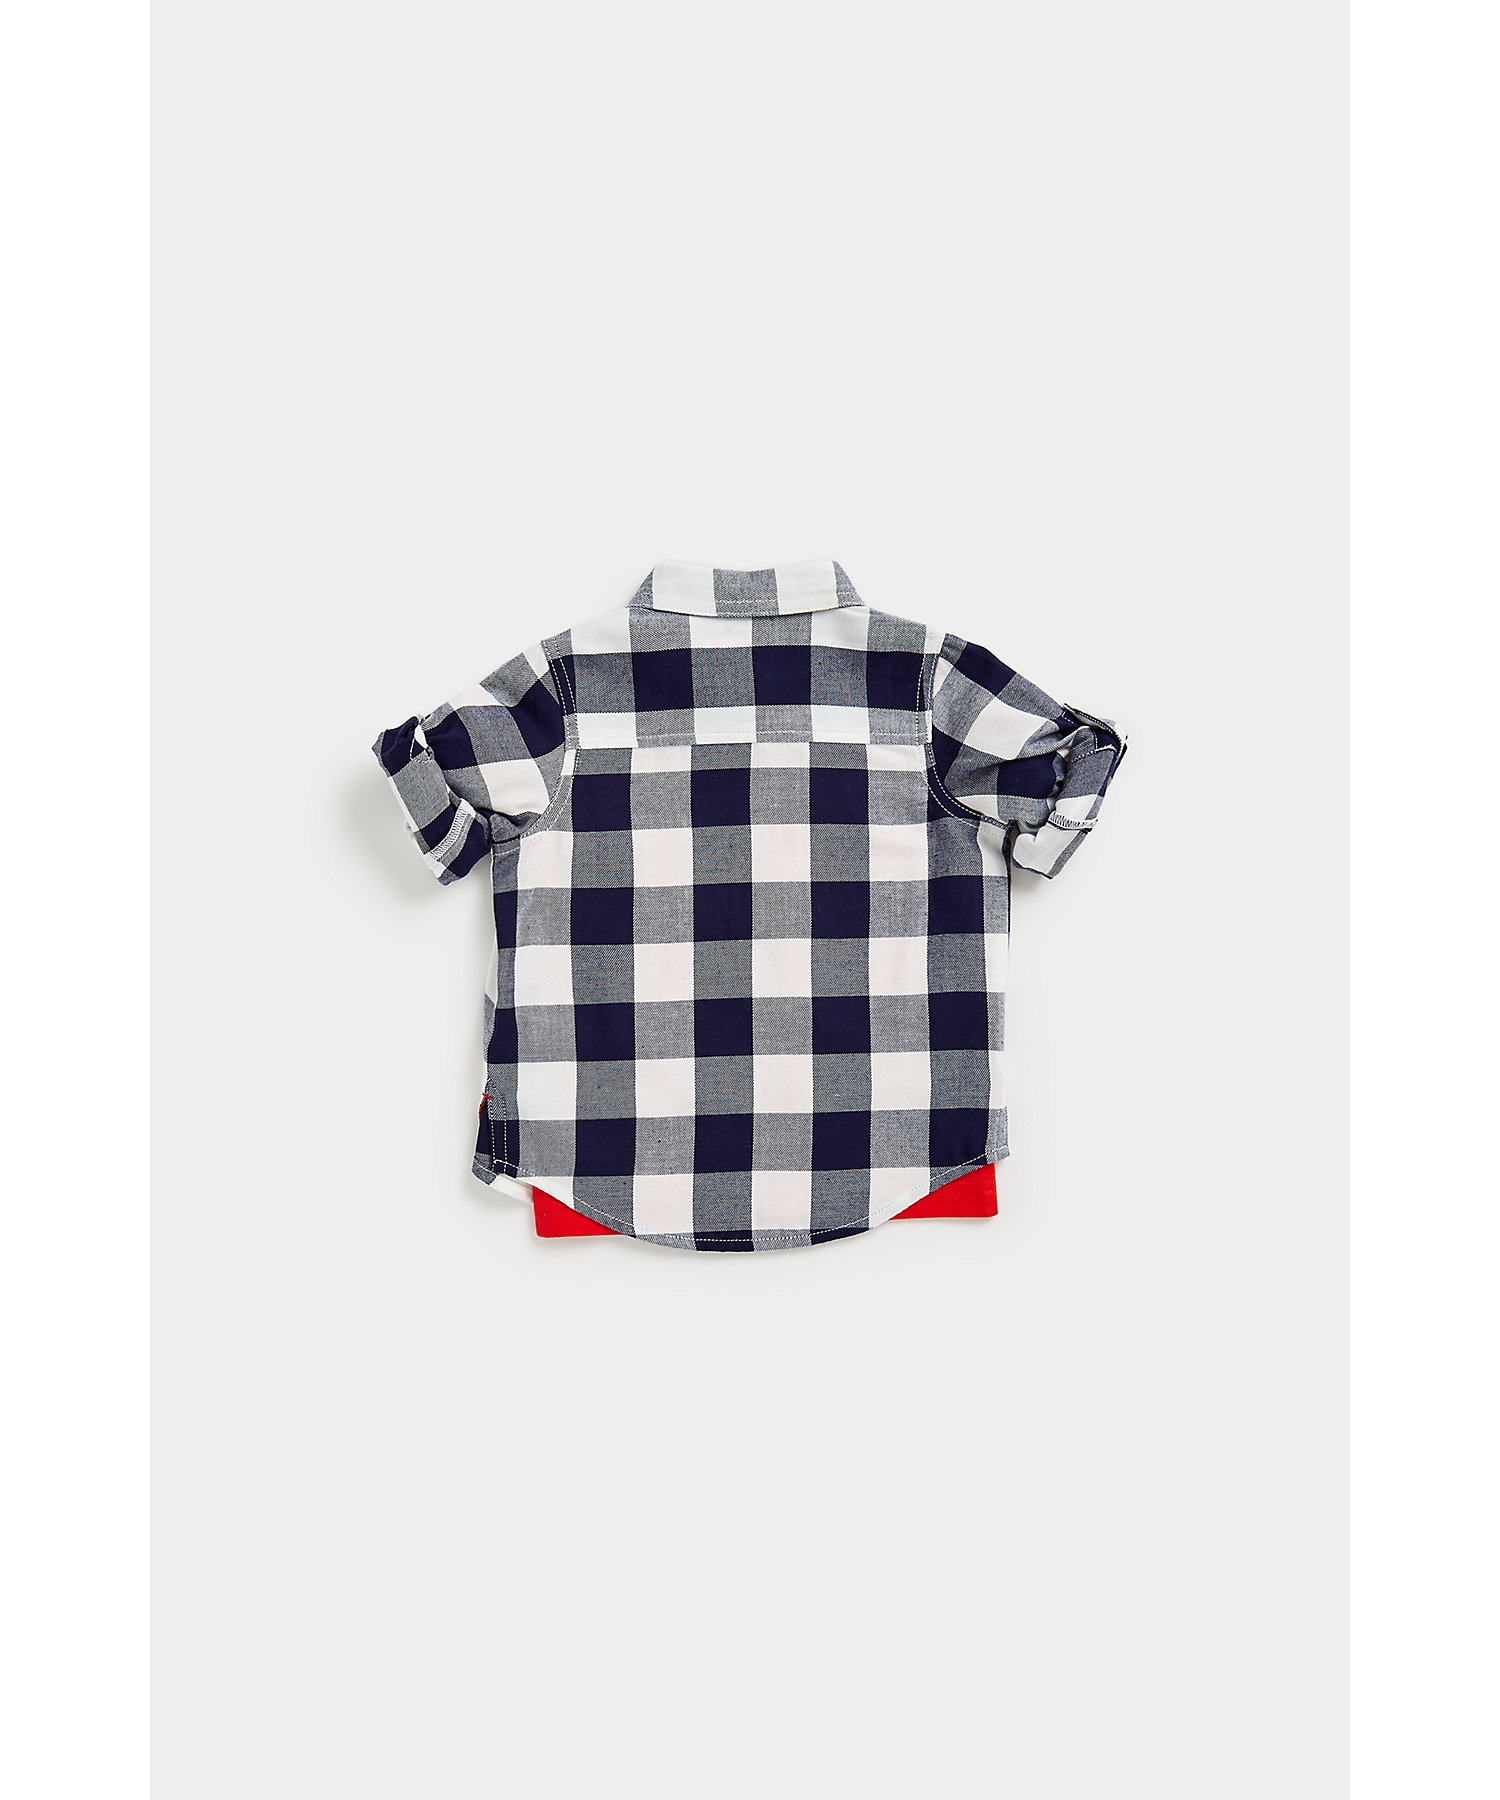 Boys Full Sleeves Shirt Witth T Shirt Checked-Multicolor